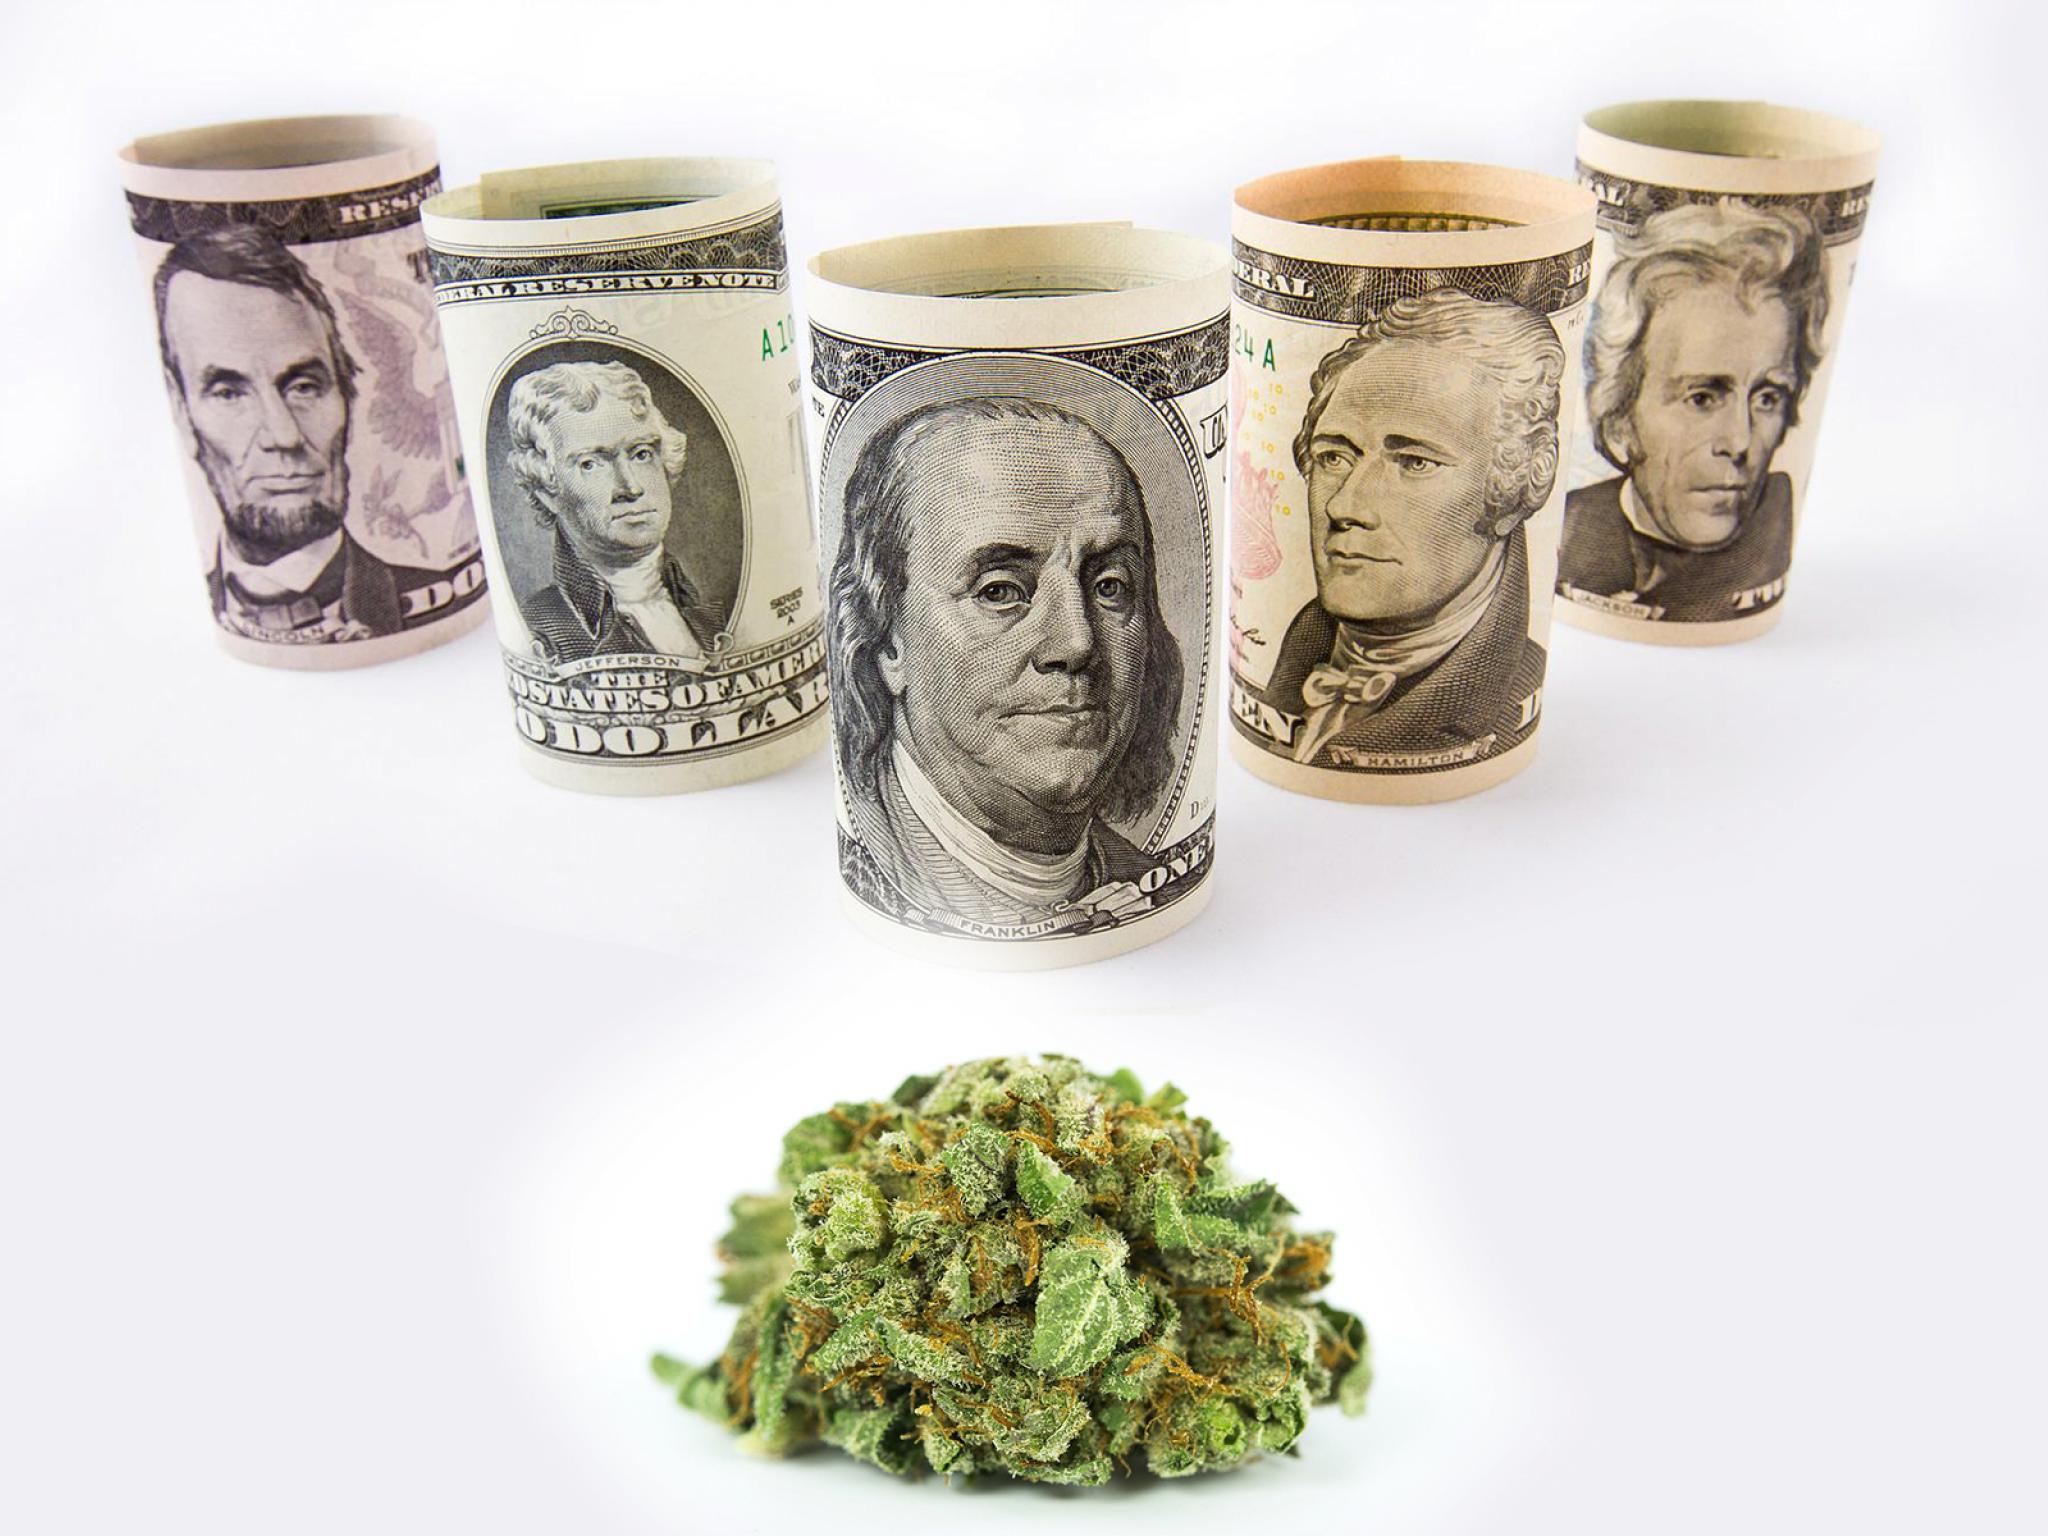  illinois-weed-revenue-takes-a-hit-from-missouri-pot-retailers-where-first-month-sales-boomed 